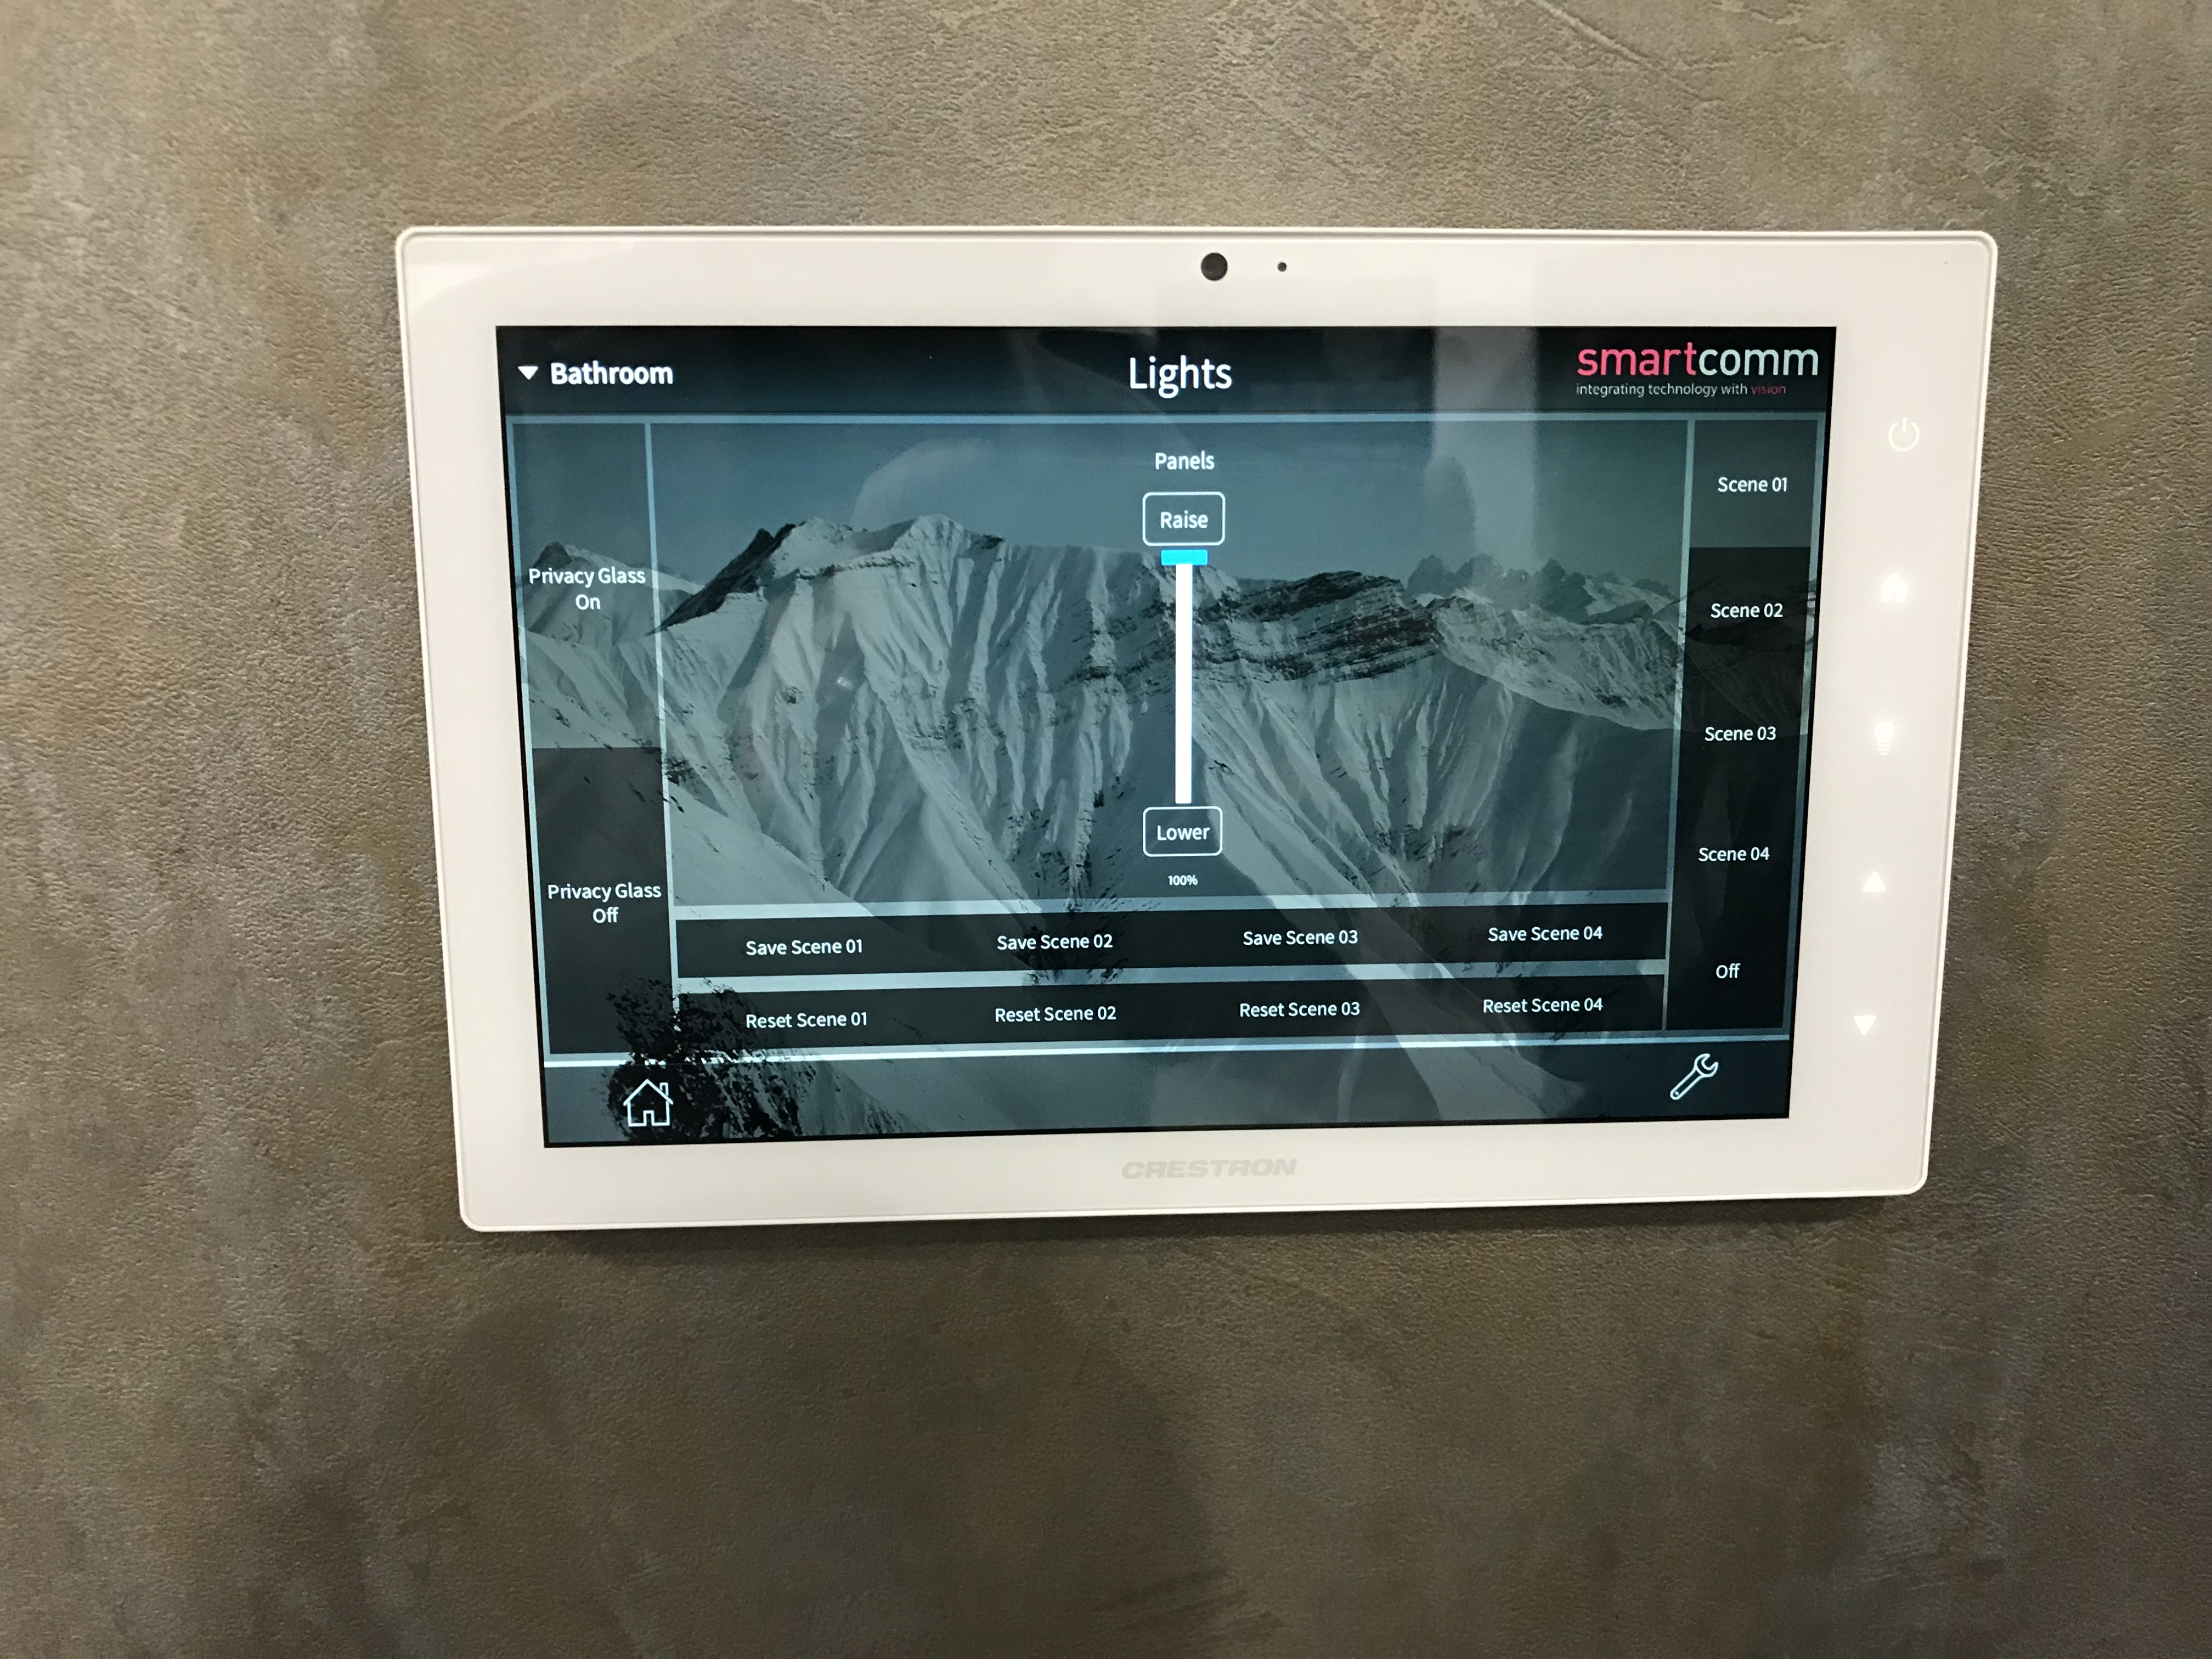 switchable privacy glass control panel